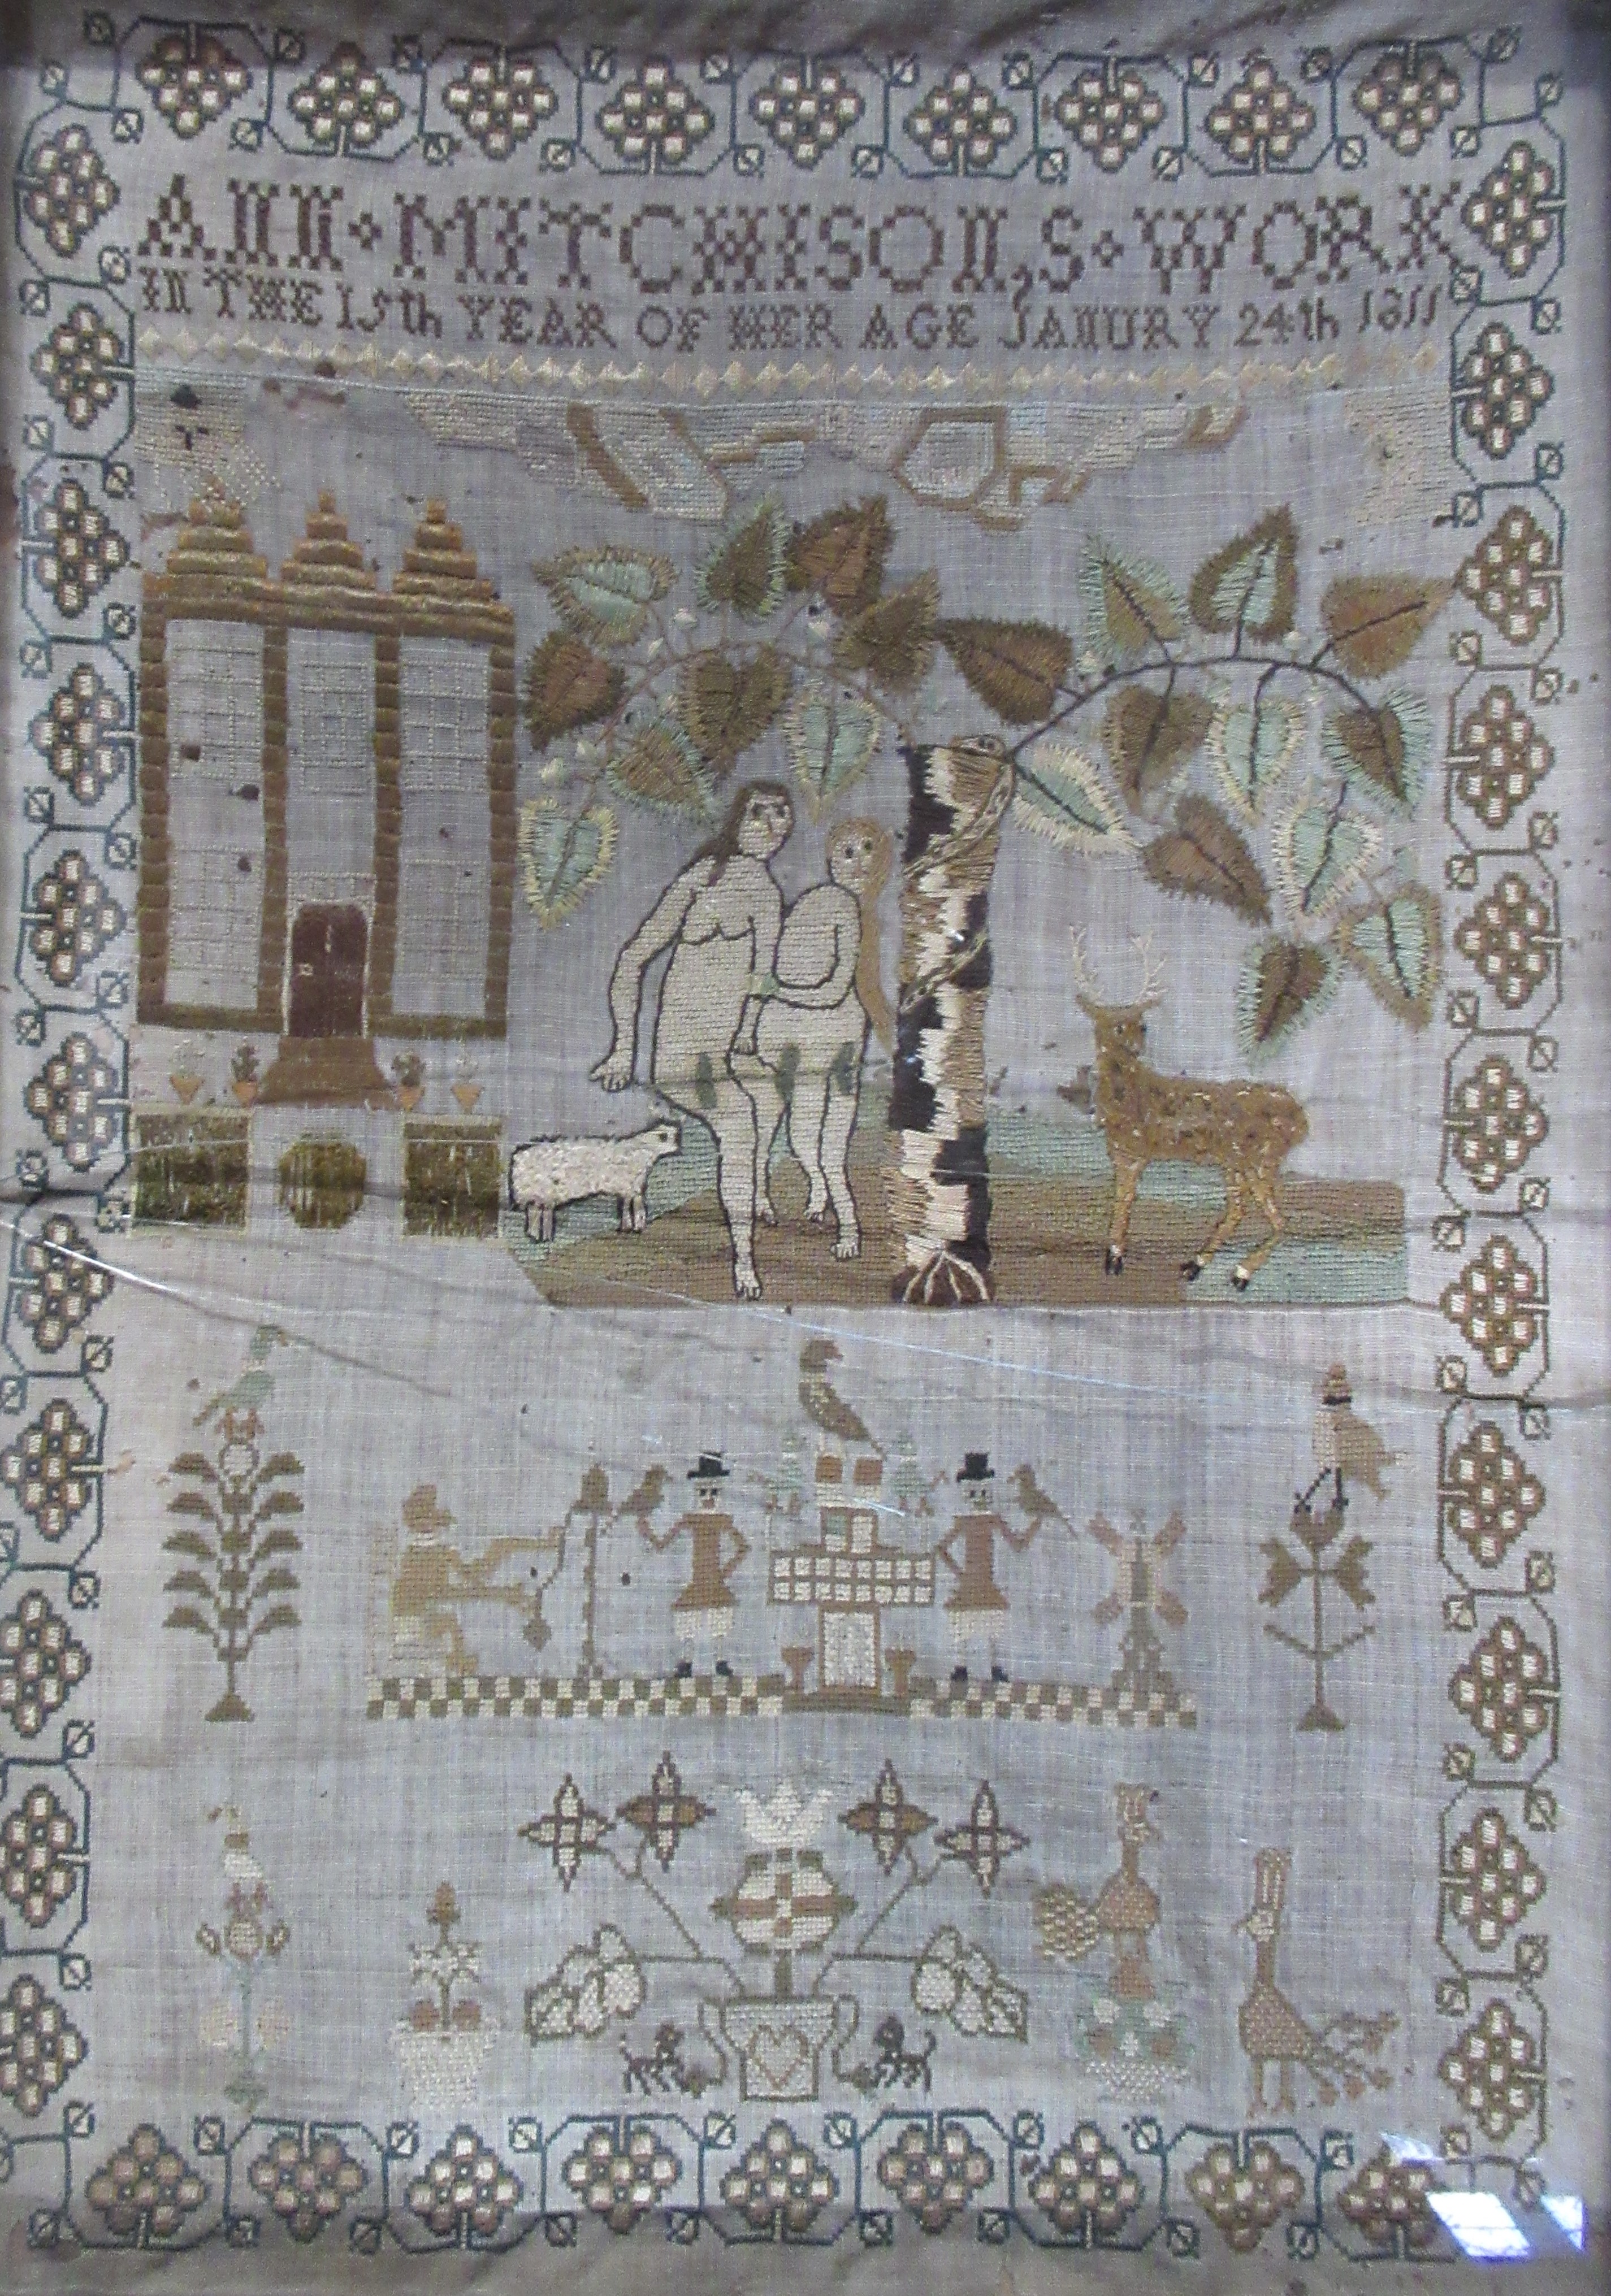 A 19th century tapestry sampler, Ann Mitchison, age 15, depicting Adam and Eve, January 24th 1811, - Image 2 of 3